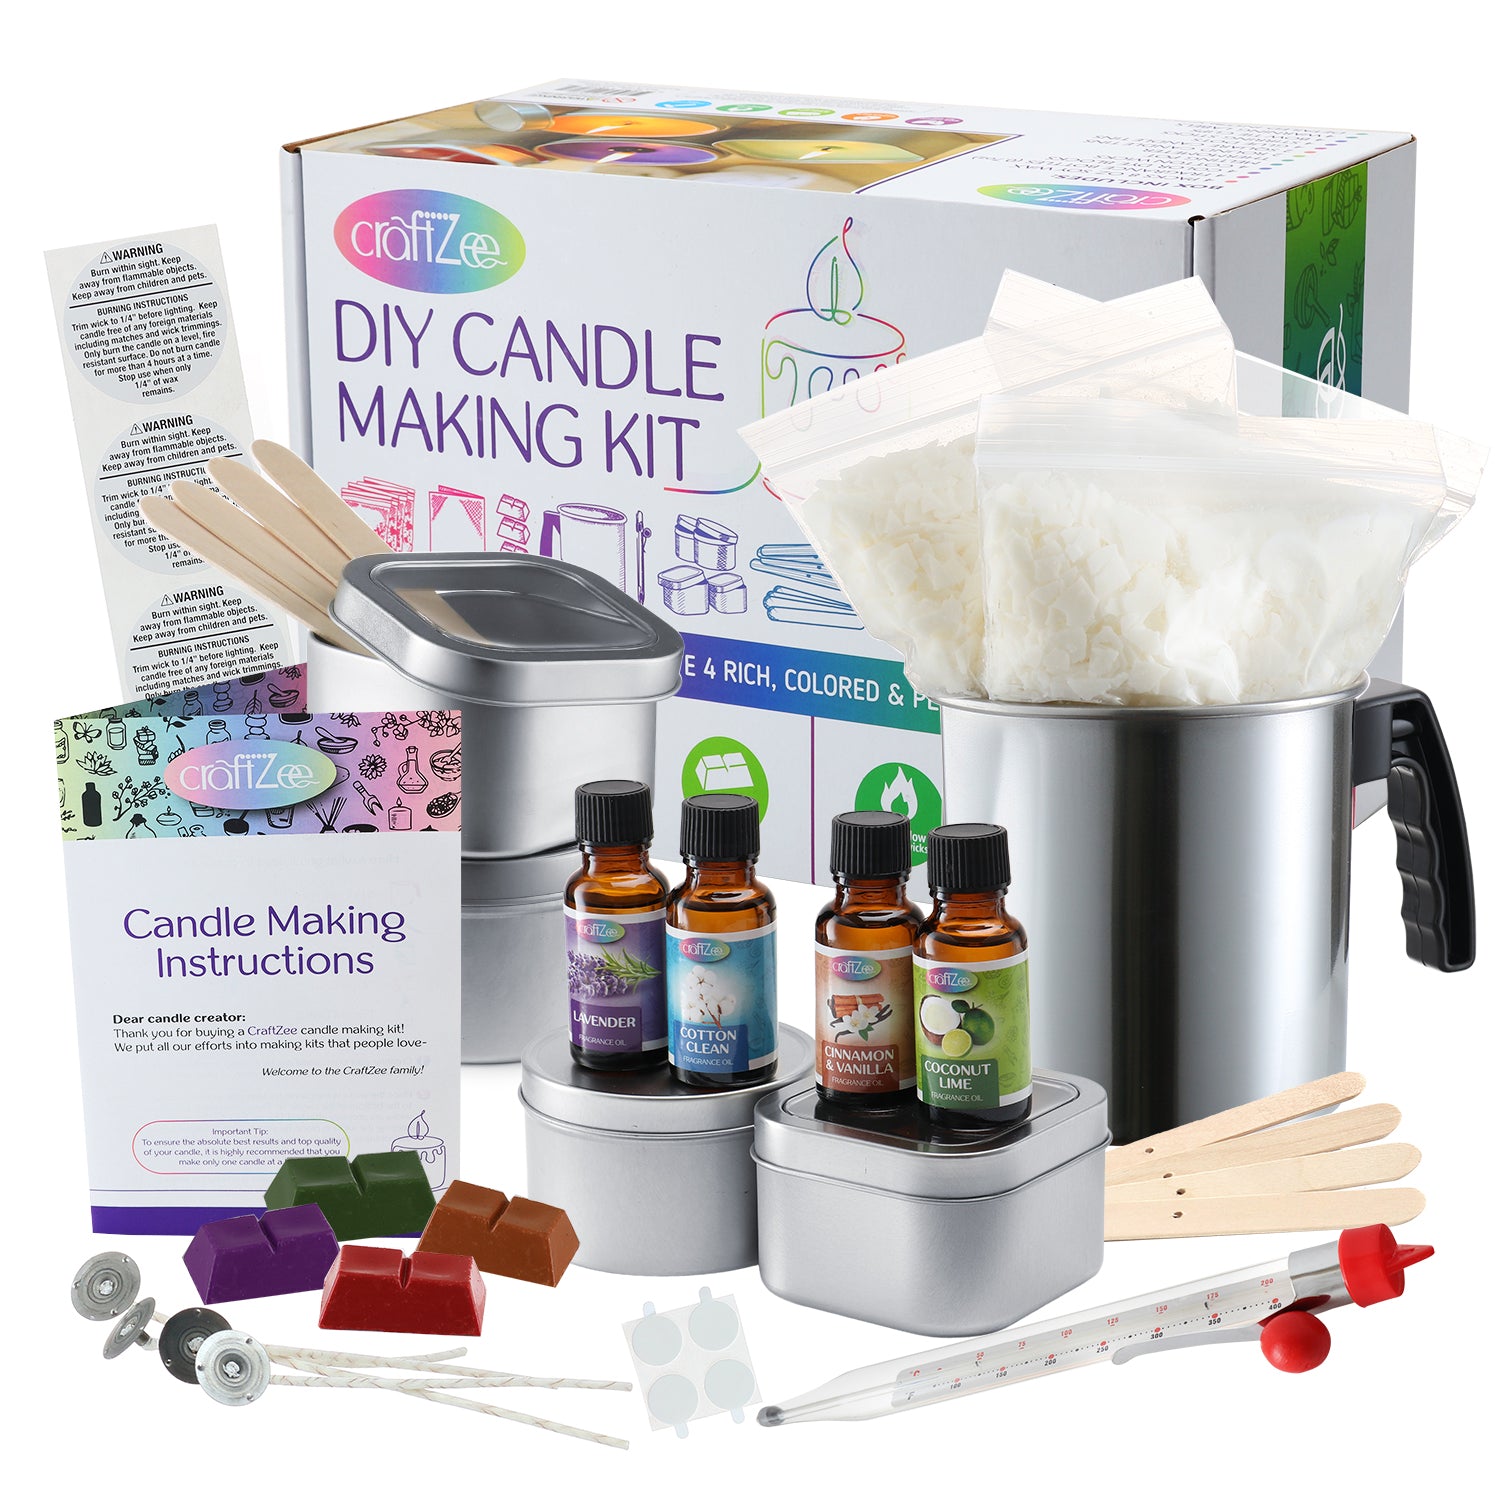 CraftZee Candle Making Supplies Set, Soy Candles Supplies Kit. DIY Candle  Accessories Kit. Candle Wicks, Pouring Pitcher. Great Craft Kit for Adults.